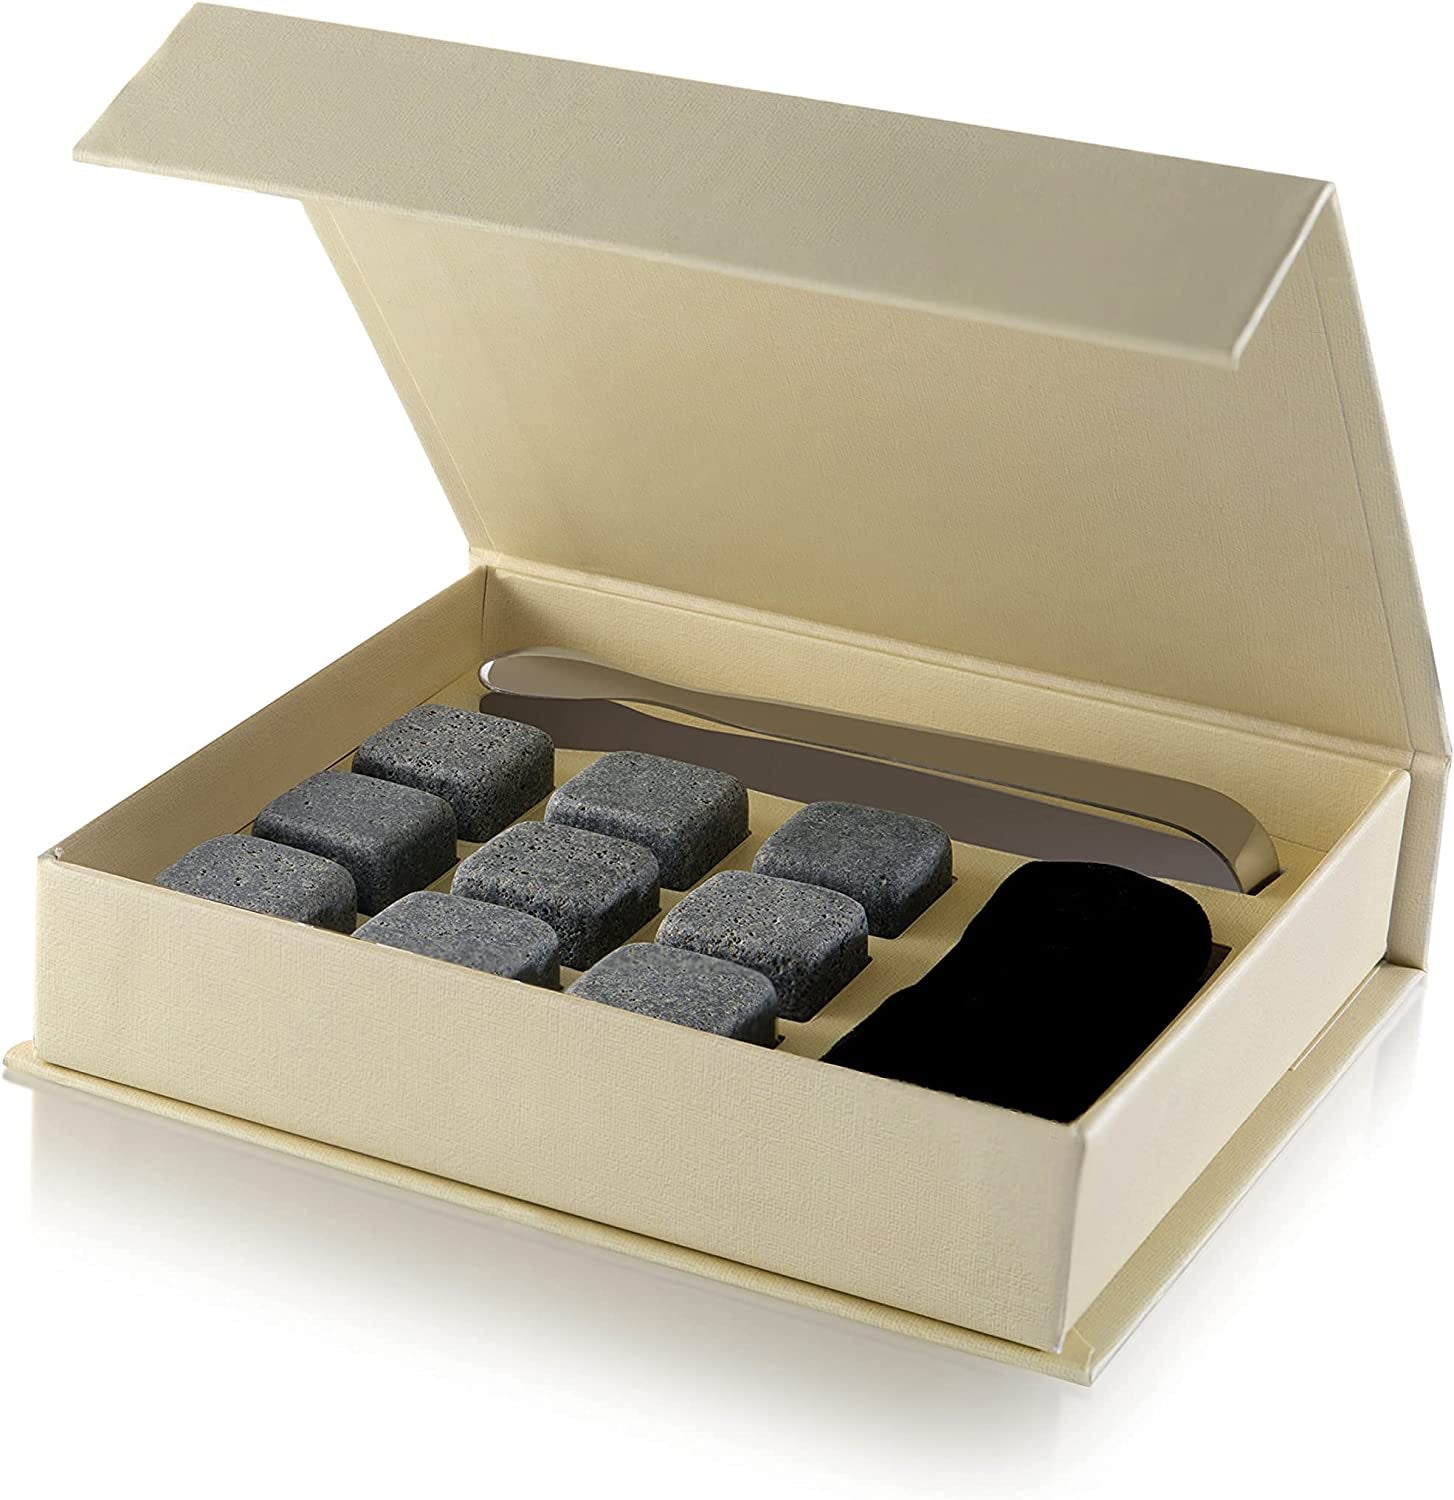 Set of 9 Grey Beverage Chilling Stones [Chill Rocks] Whiskey Stones for Whiskey and Other Beverages - in Gift Box with Velvet Carrying Pouch - Made of 100% Pure Soapstone - by Quiseen